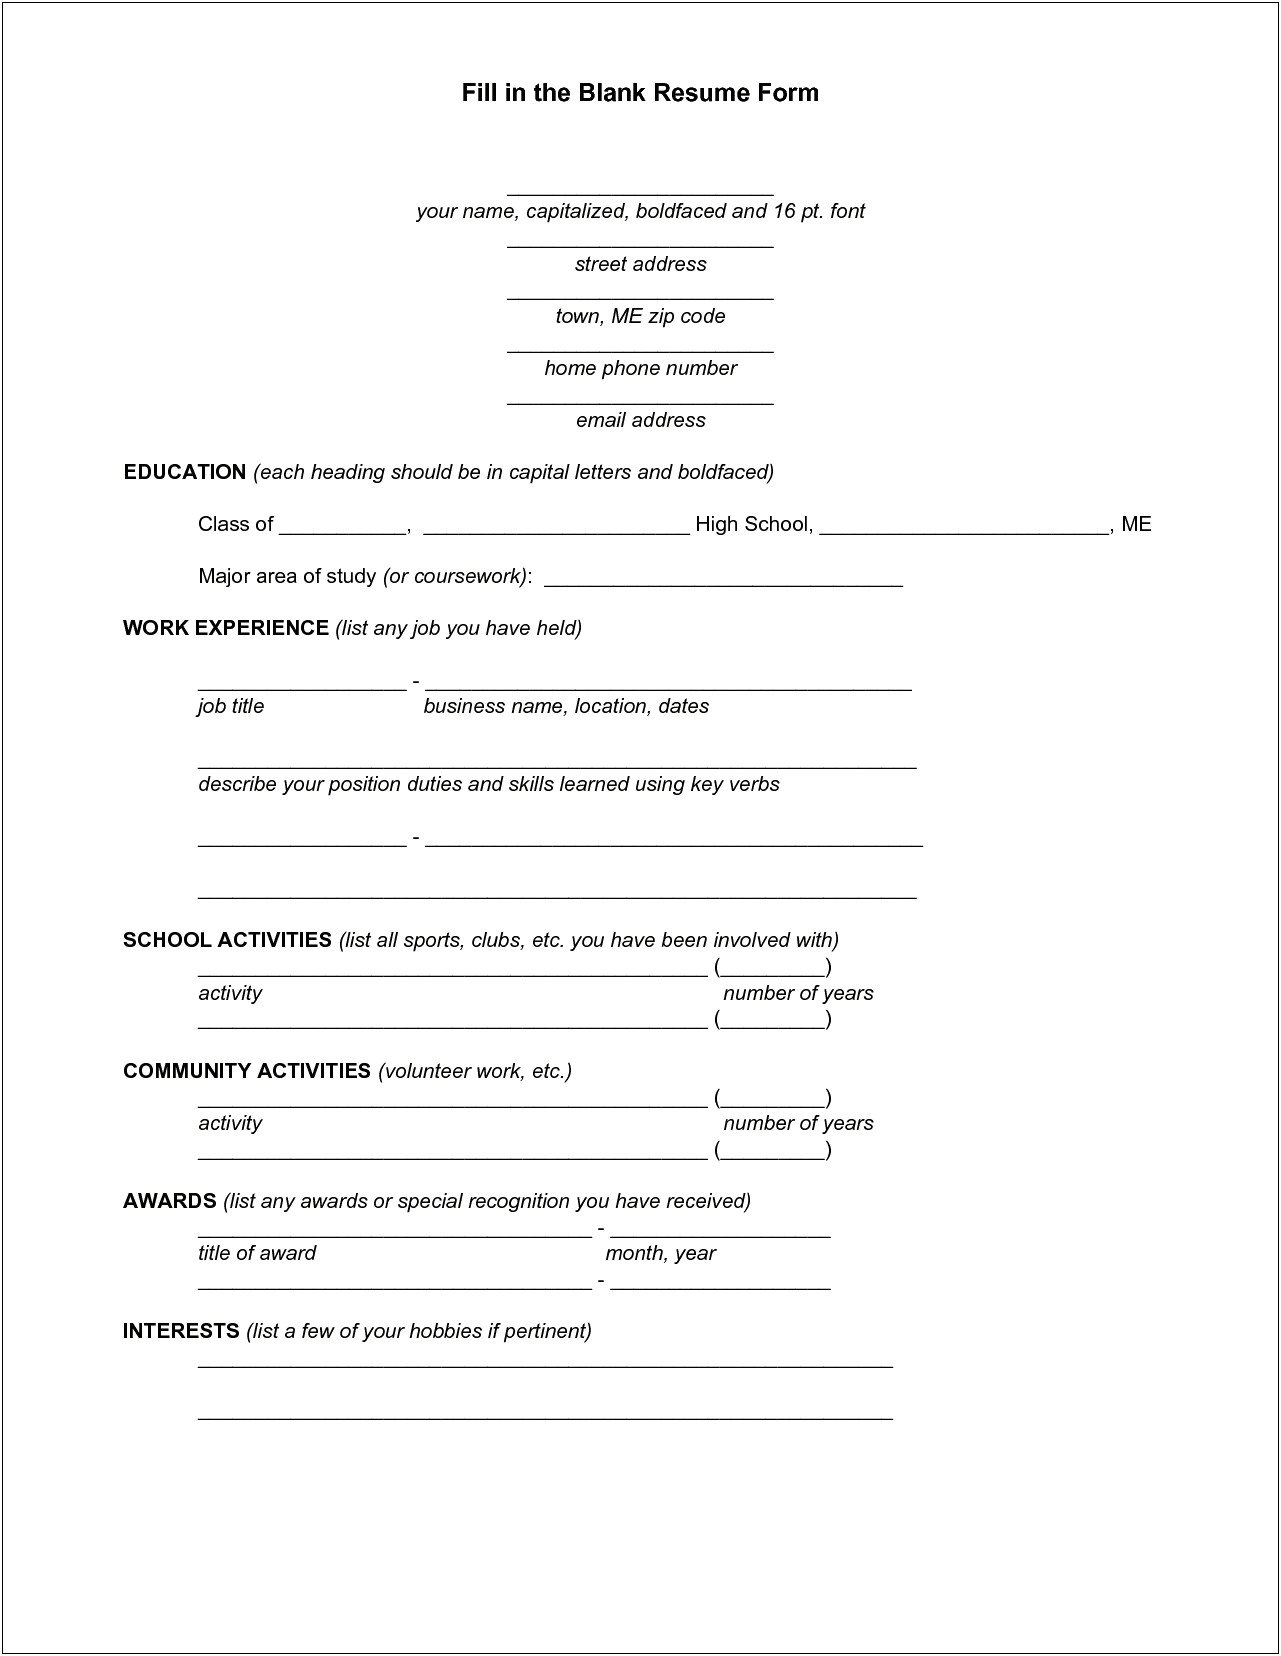 Resume Fill Up Form Free Download